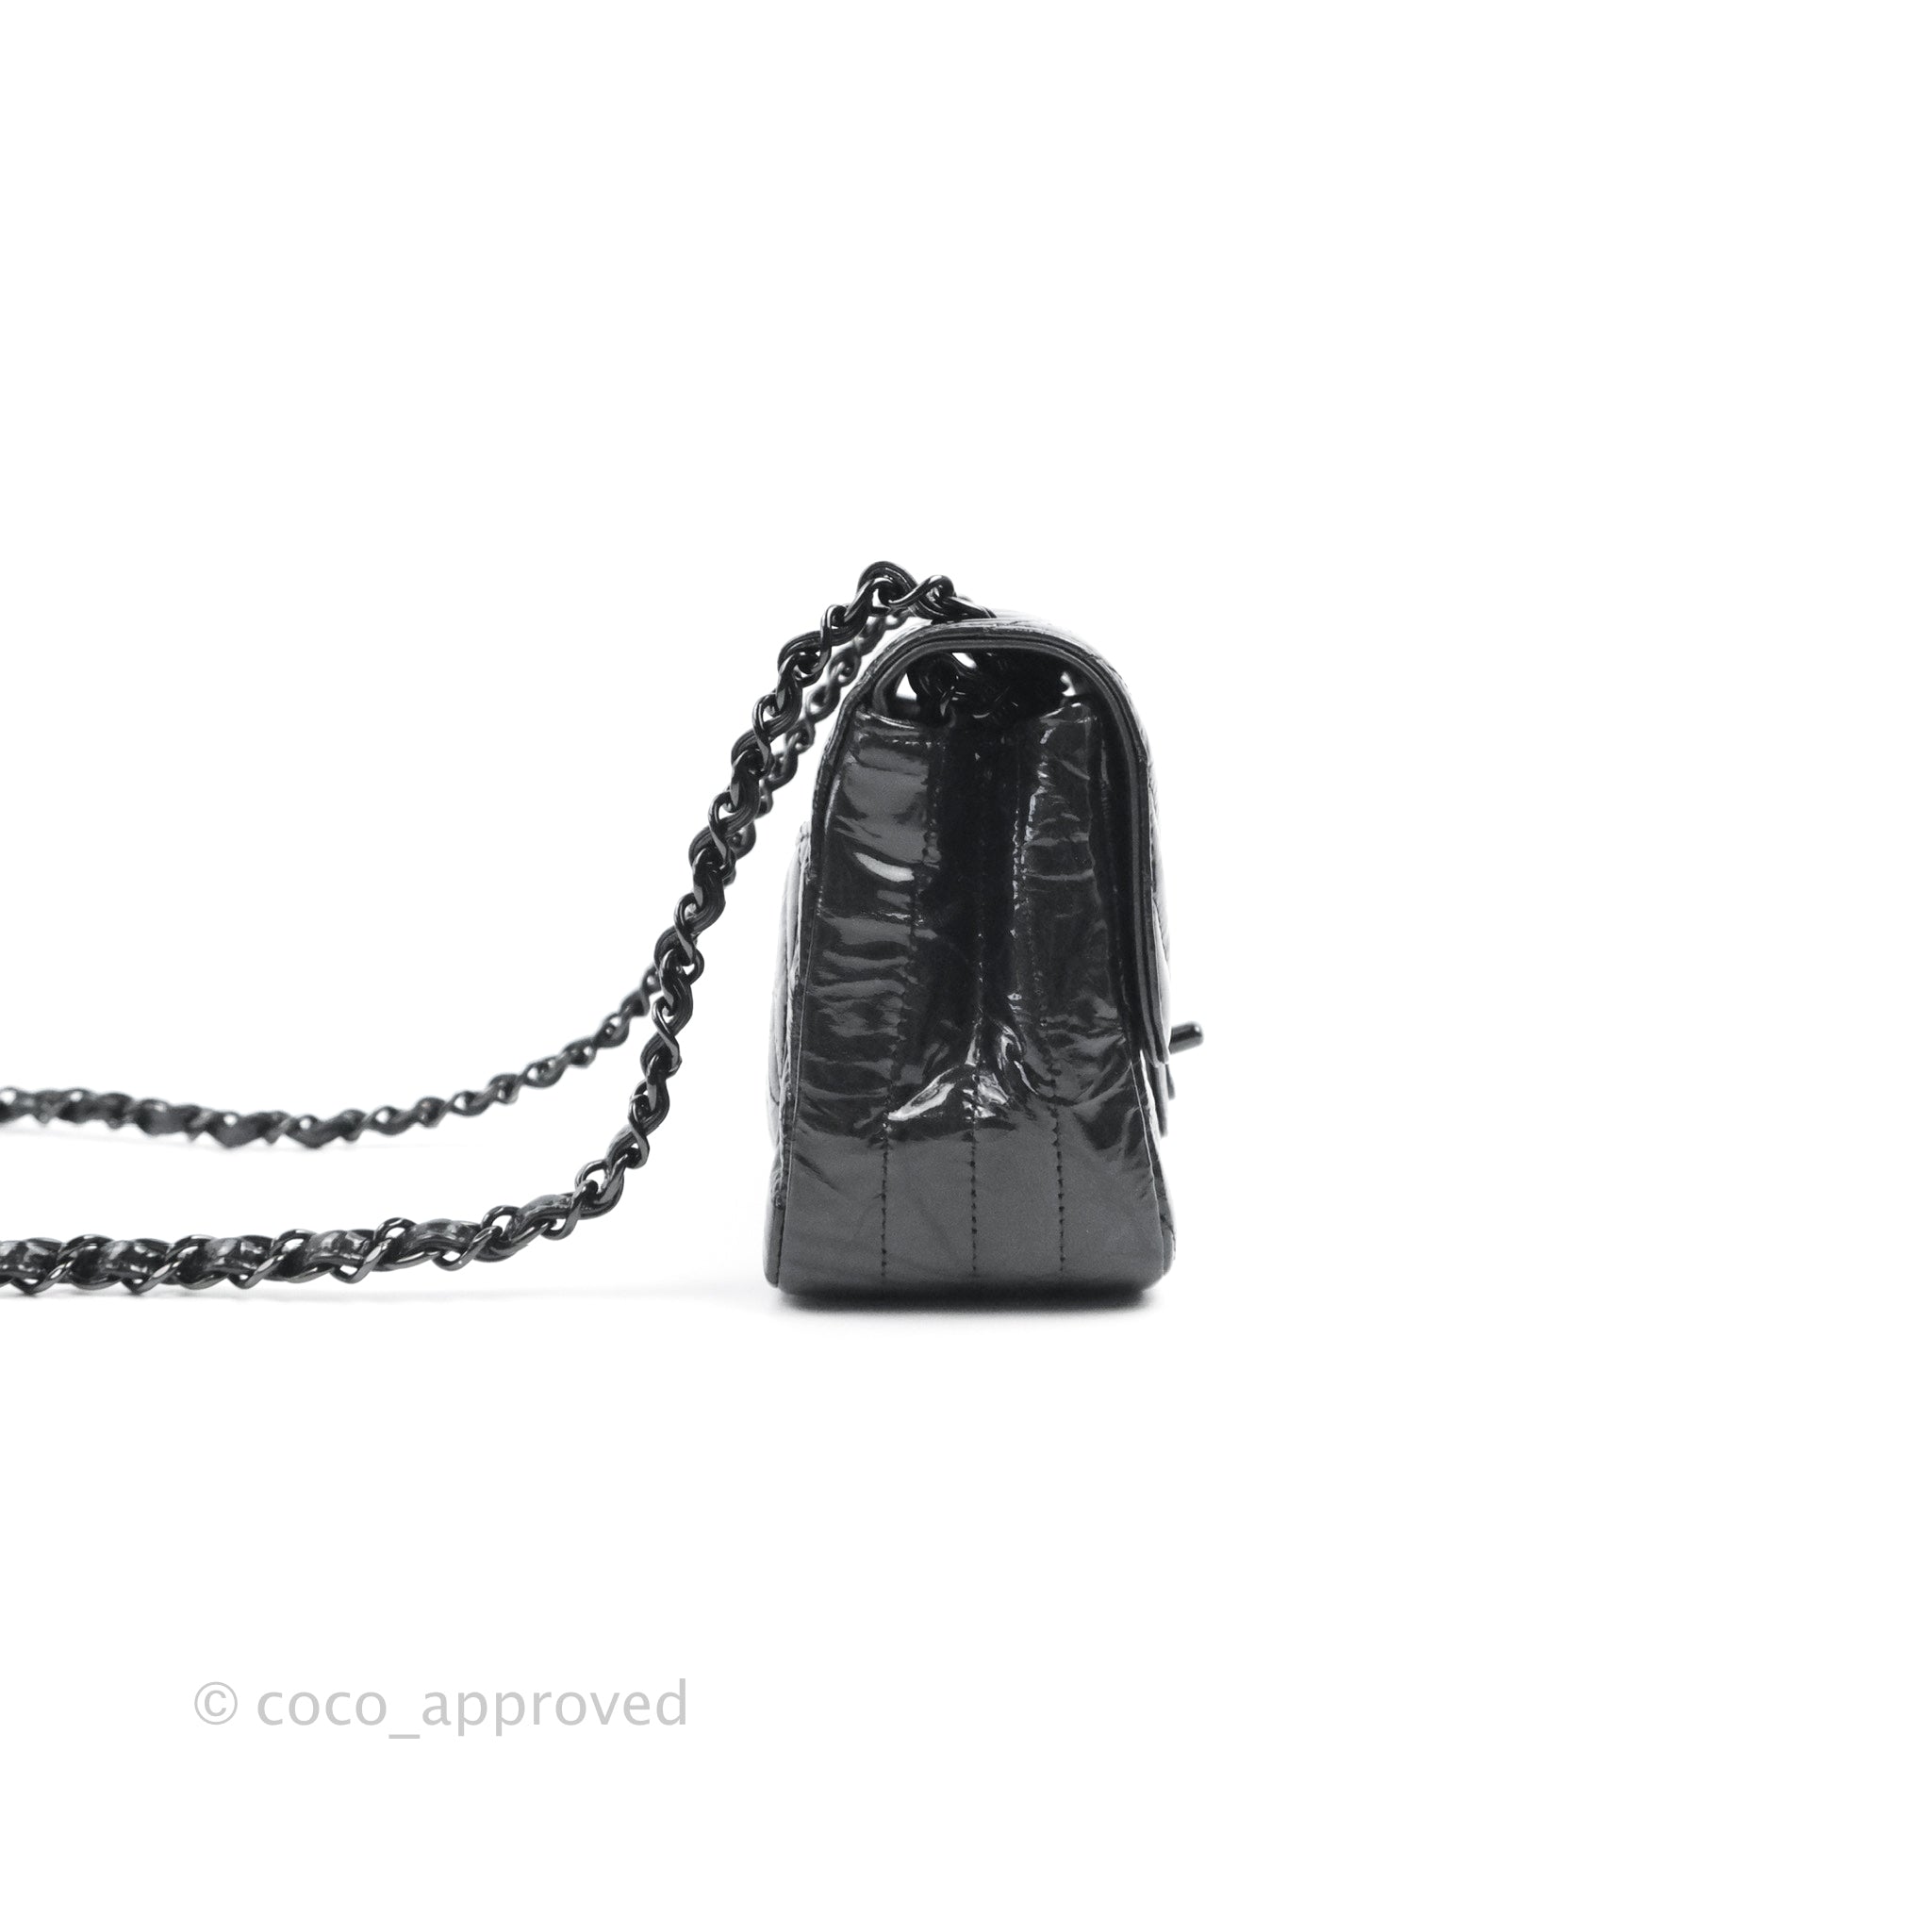 CHANEL, Bags, Chanel Flap Black Quilted Patent Leather Rectangular Mini  Ruthenium Chain Bag